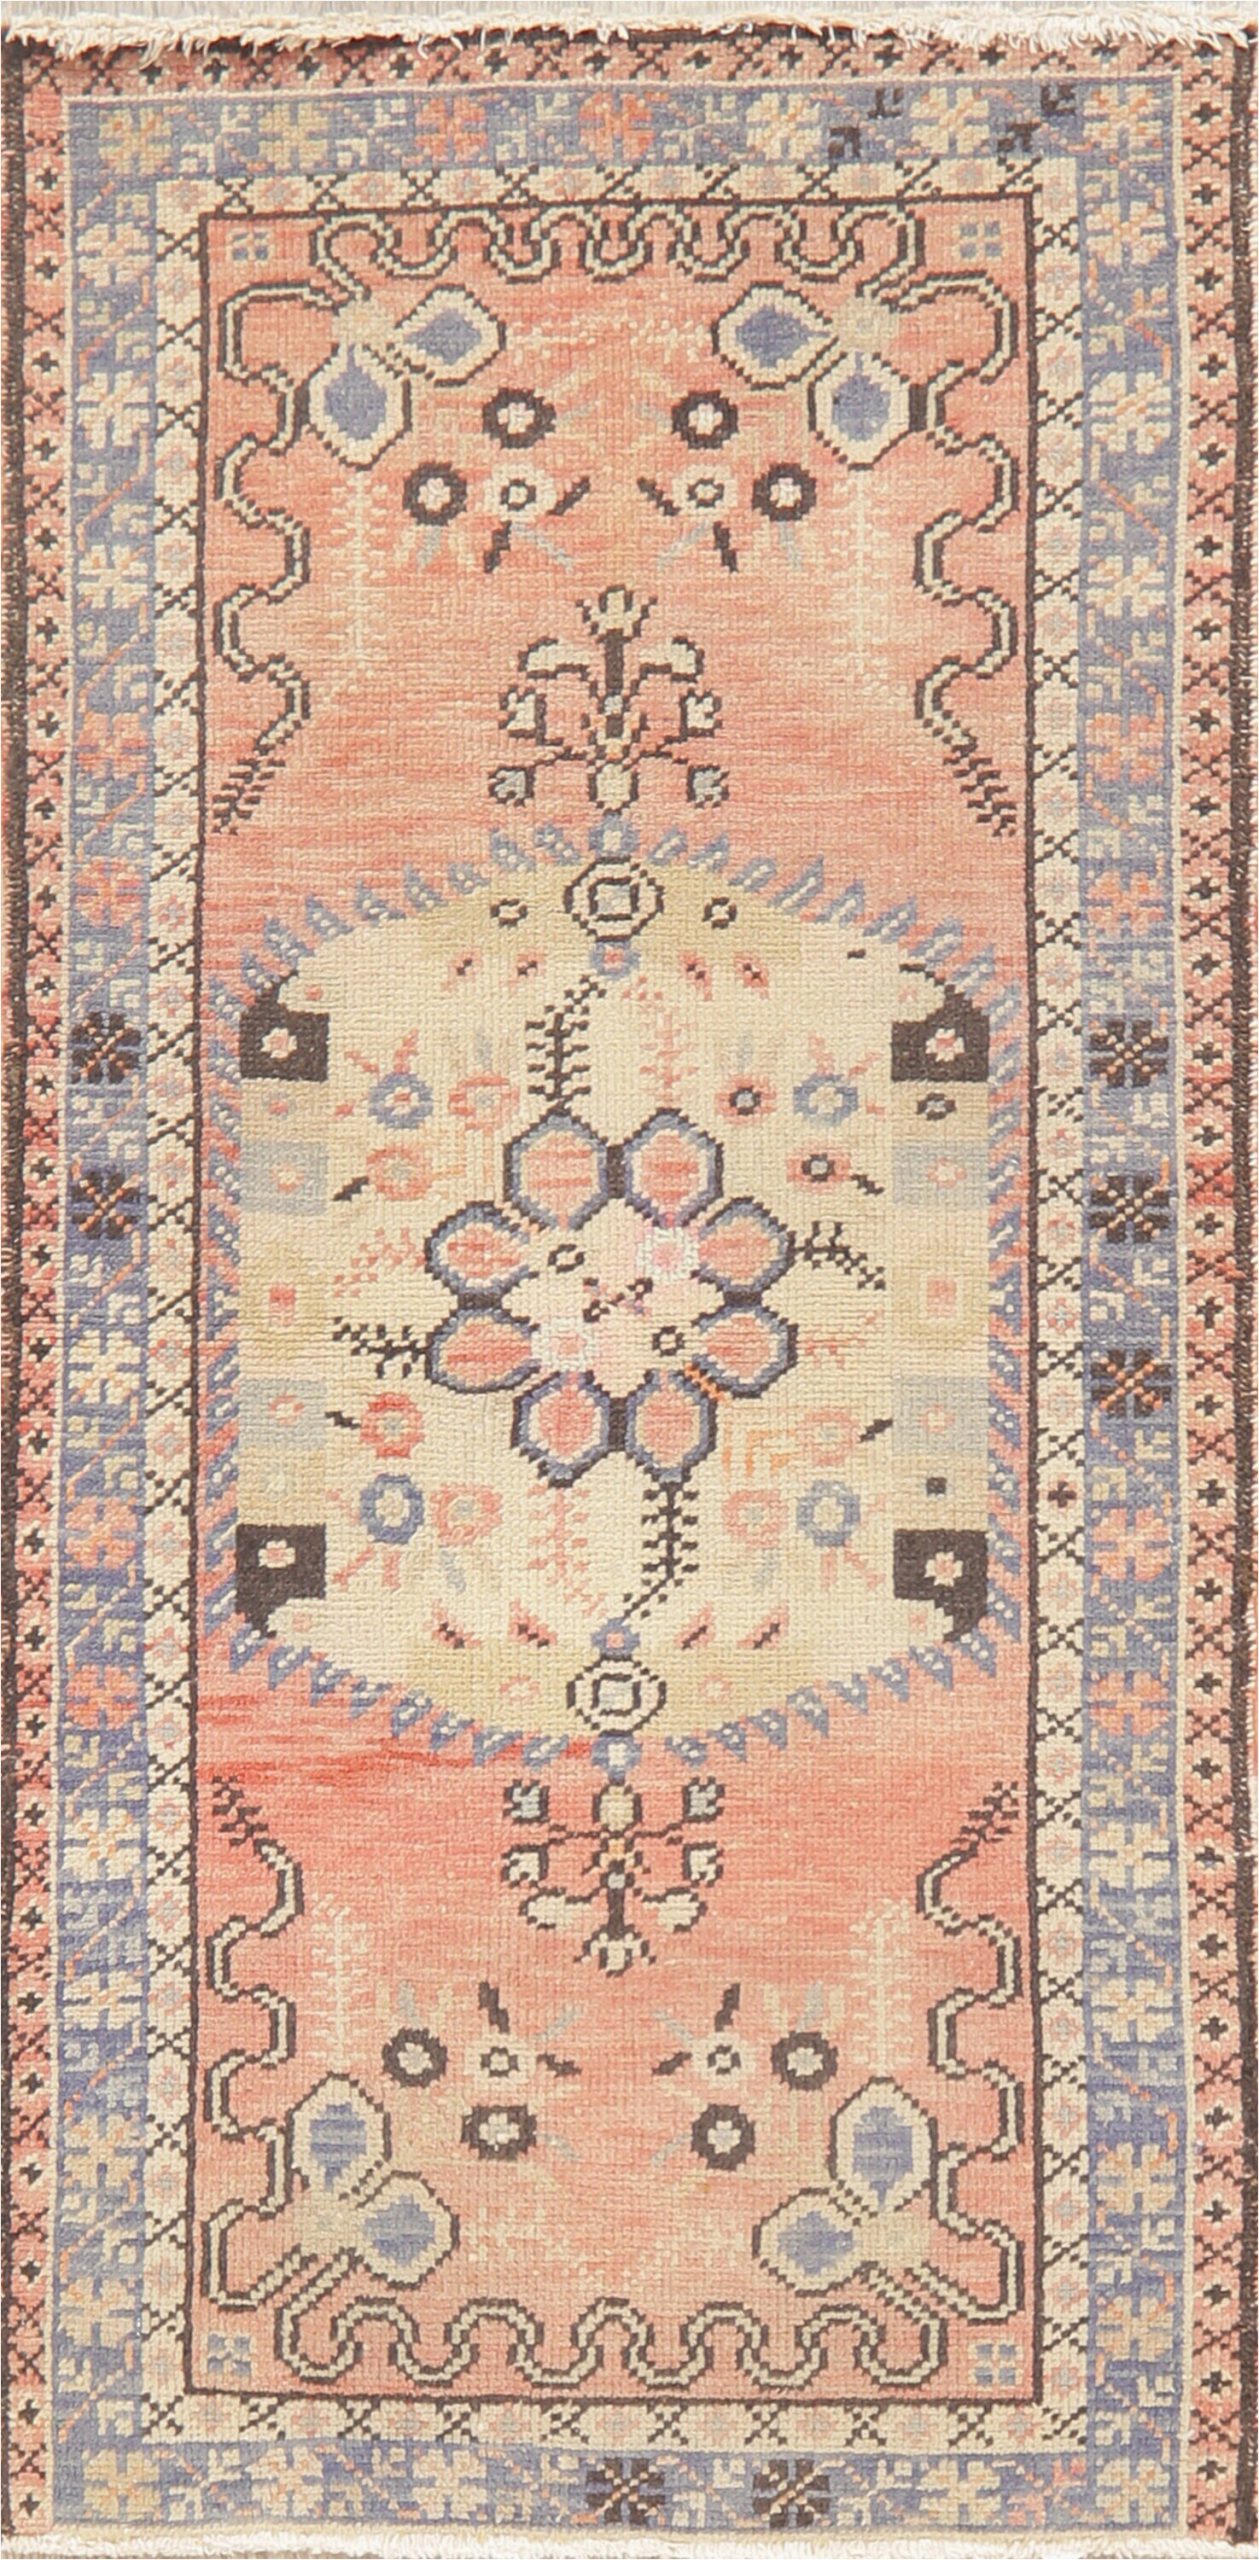 Peach and Blue Persian Rug World Market E Of A Kind Keensburg oriental Hand Knotted 2 5" X 4 8" Wool Peach area Rug